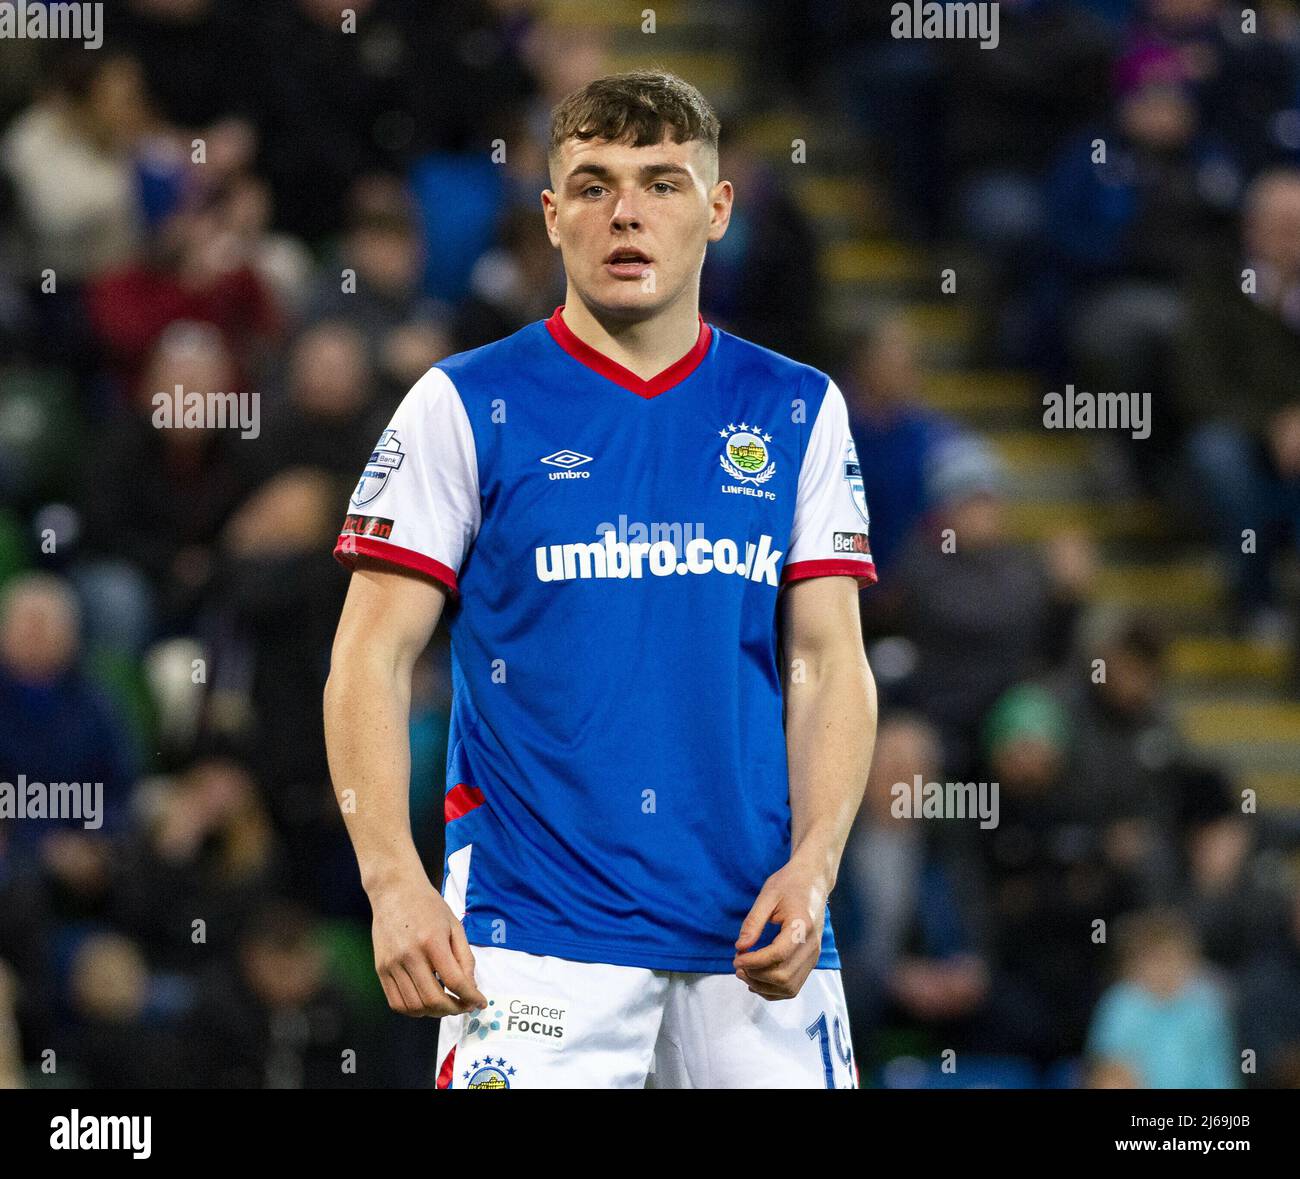 Linfield player Ethan Devine shown in action at a league game held at ...